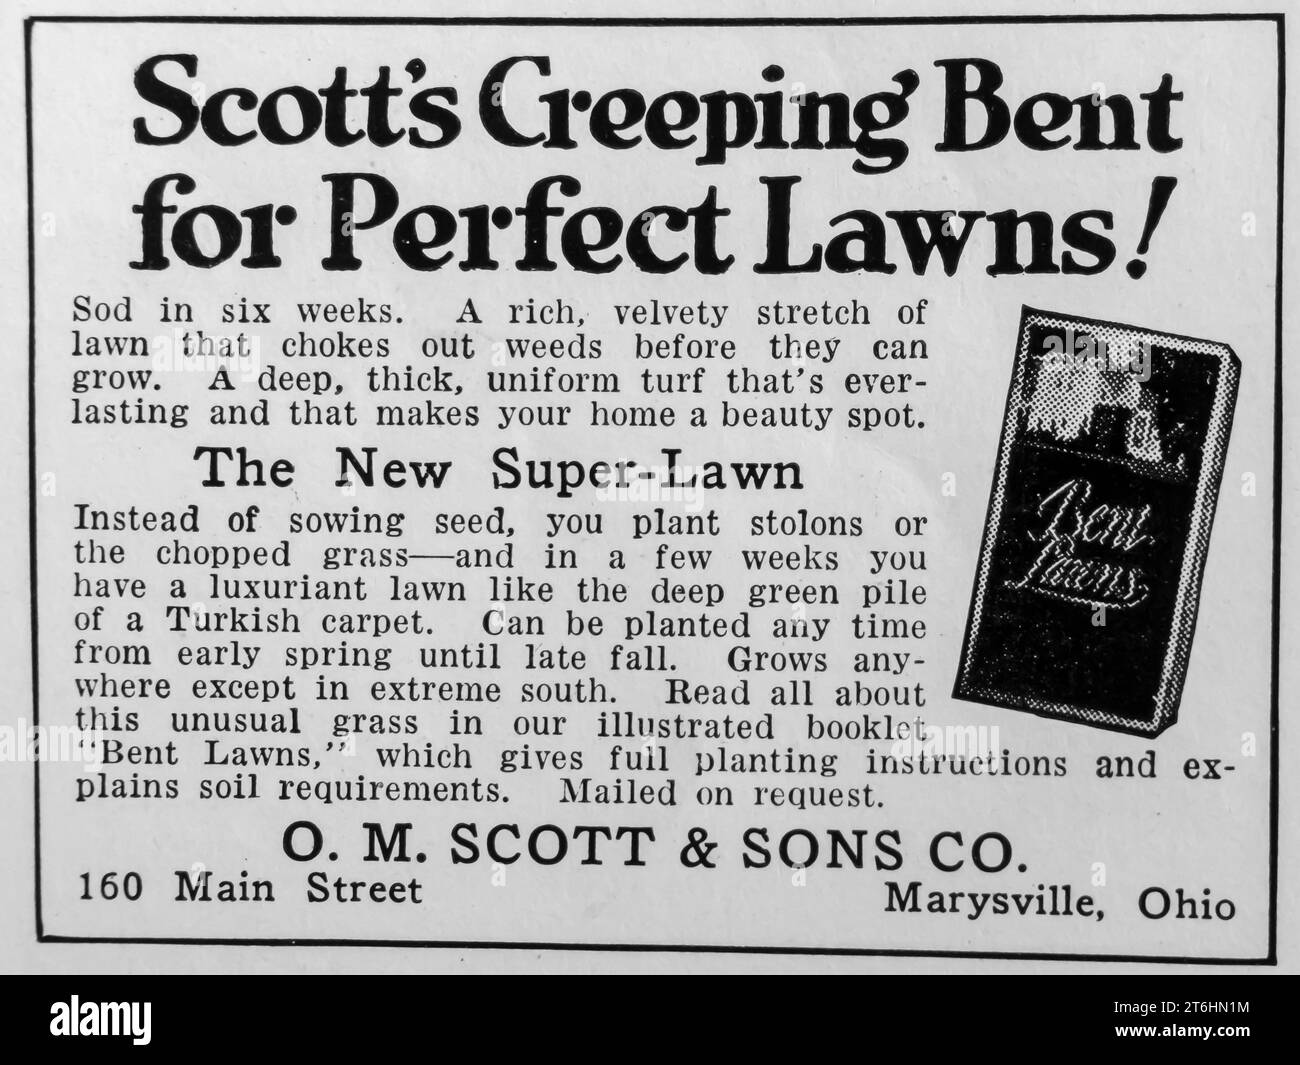 1927 Scott's creeping bent for perfect lawns ad Stock Photo